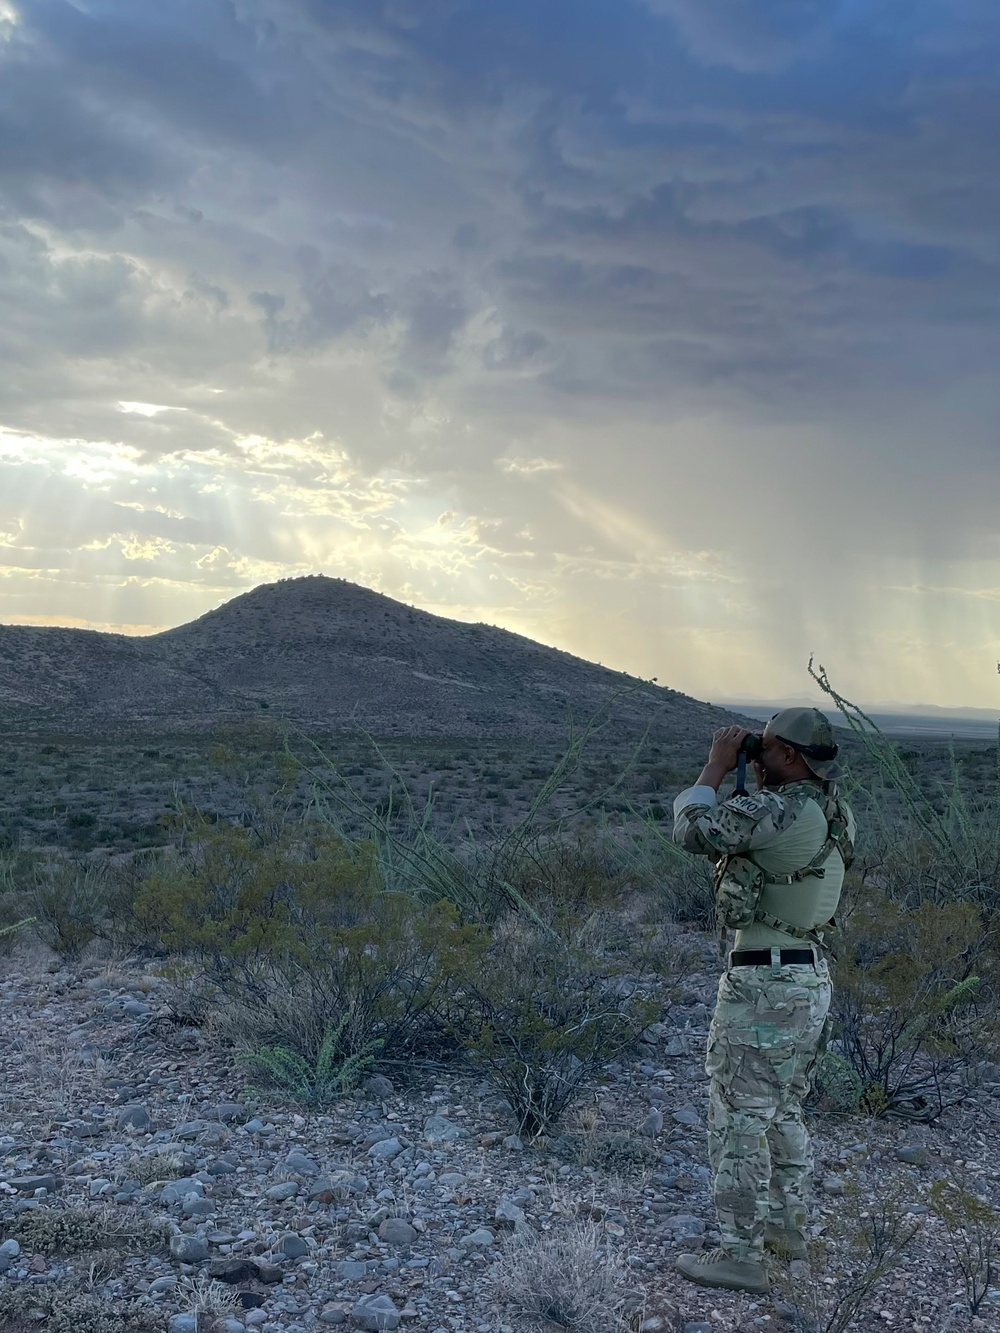 Combat weather expands mission application through experimentation exercise